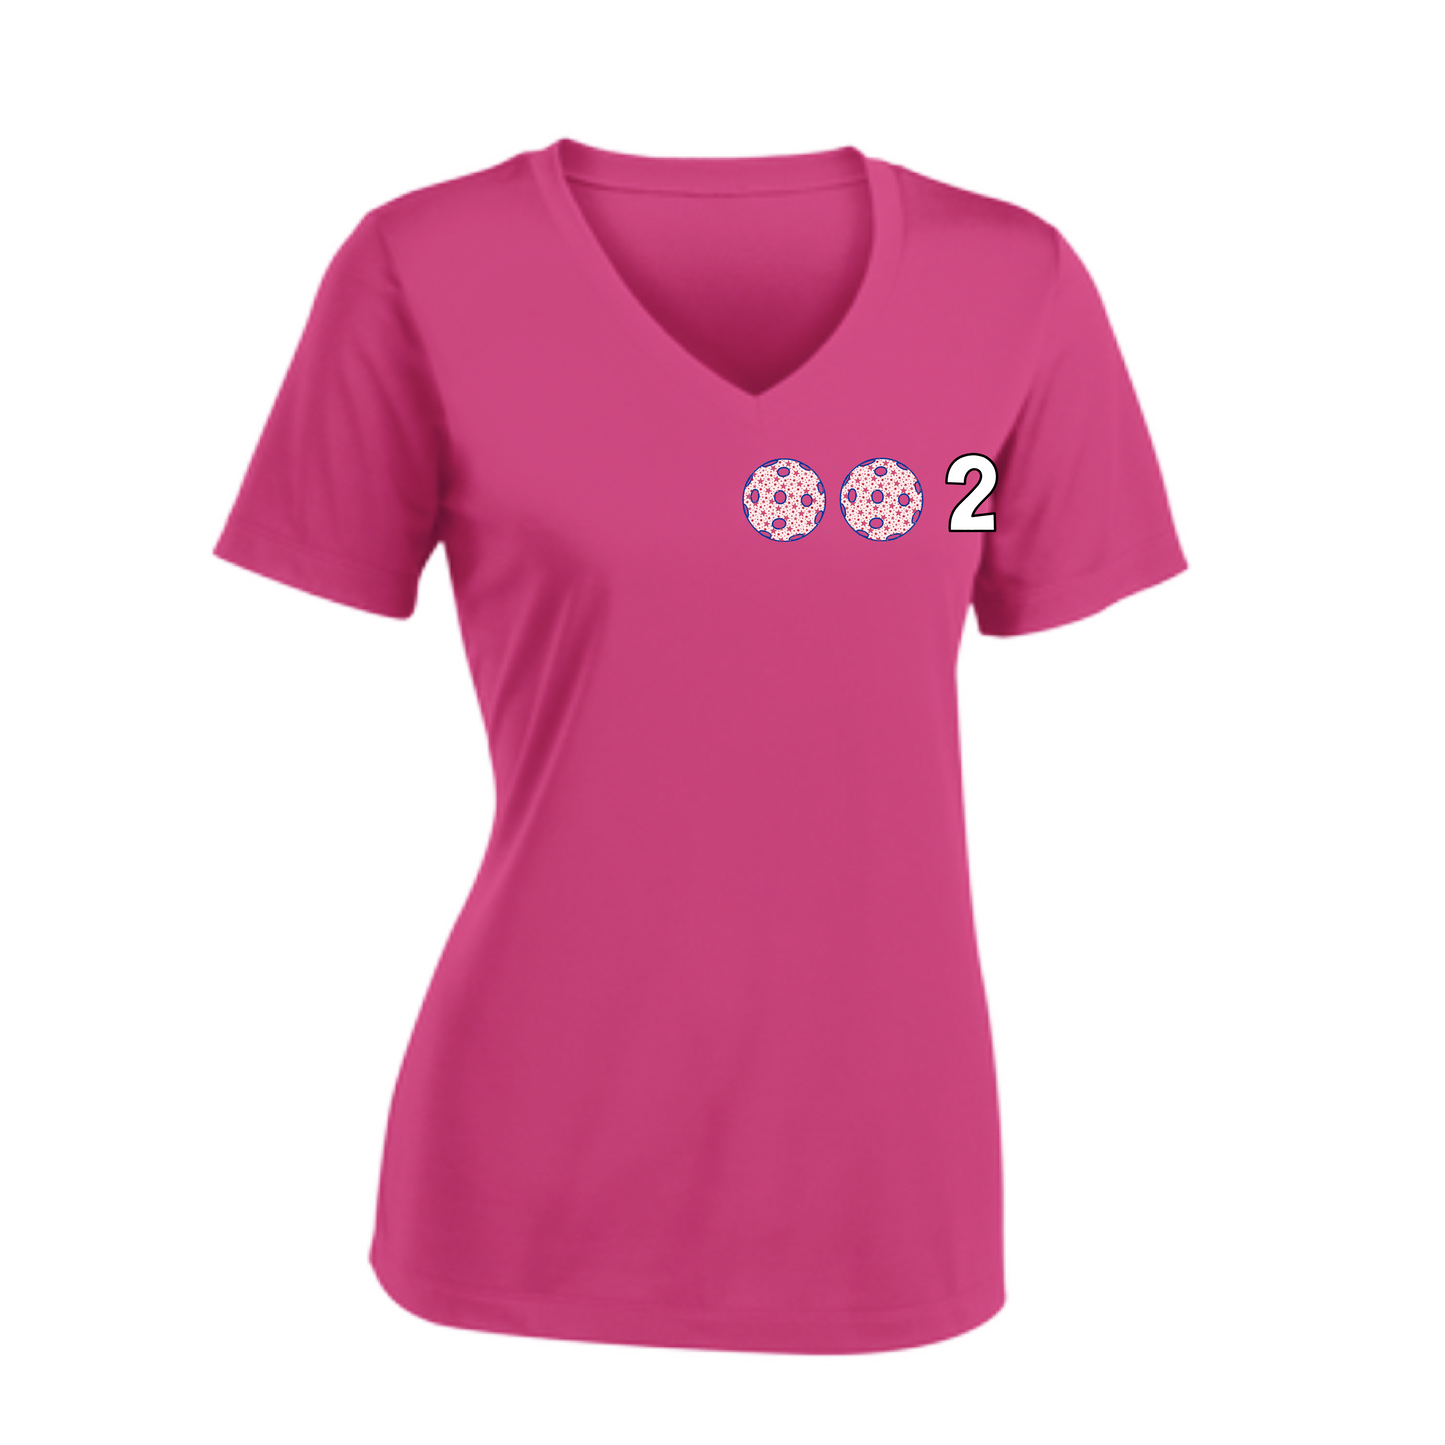 002 With Pickleballs (Colors Yellow Pink White) Customizable | Women's Short Sleeve V-Neck Pickleball Shirts | 100% Polyester